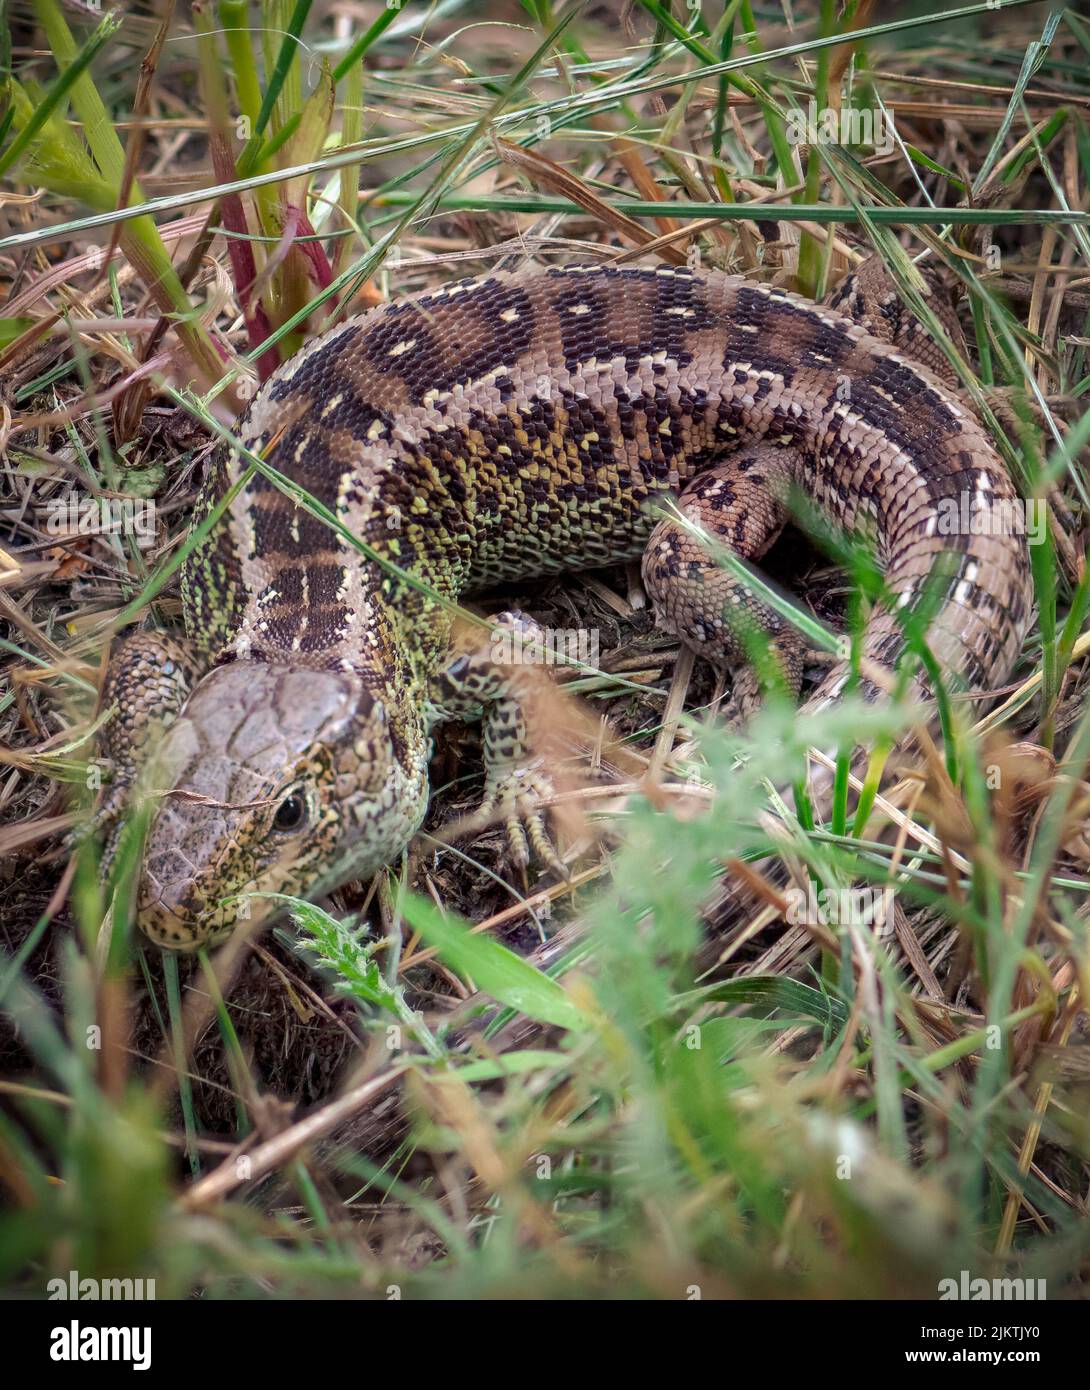 A vertical shot of a sand lizard on the grass in its natural habitat Stock Photo